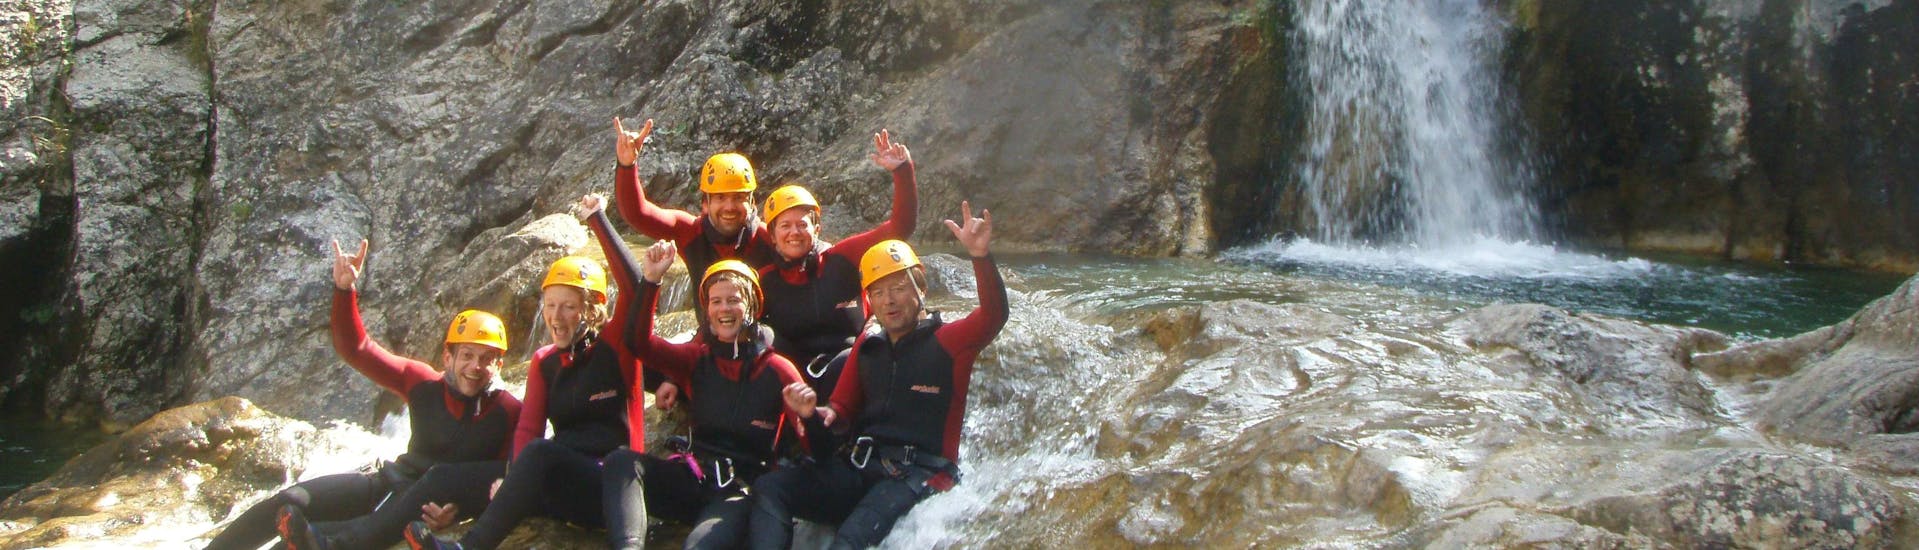 Canyoning durch die Stuibenfälle in Reutte - Who Made You .